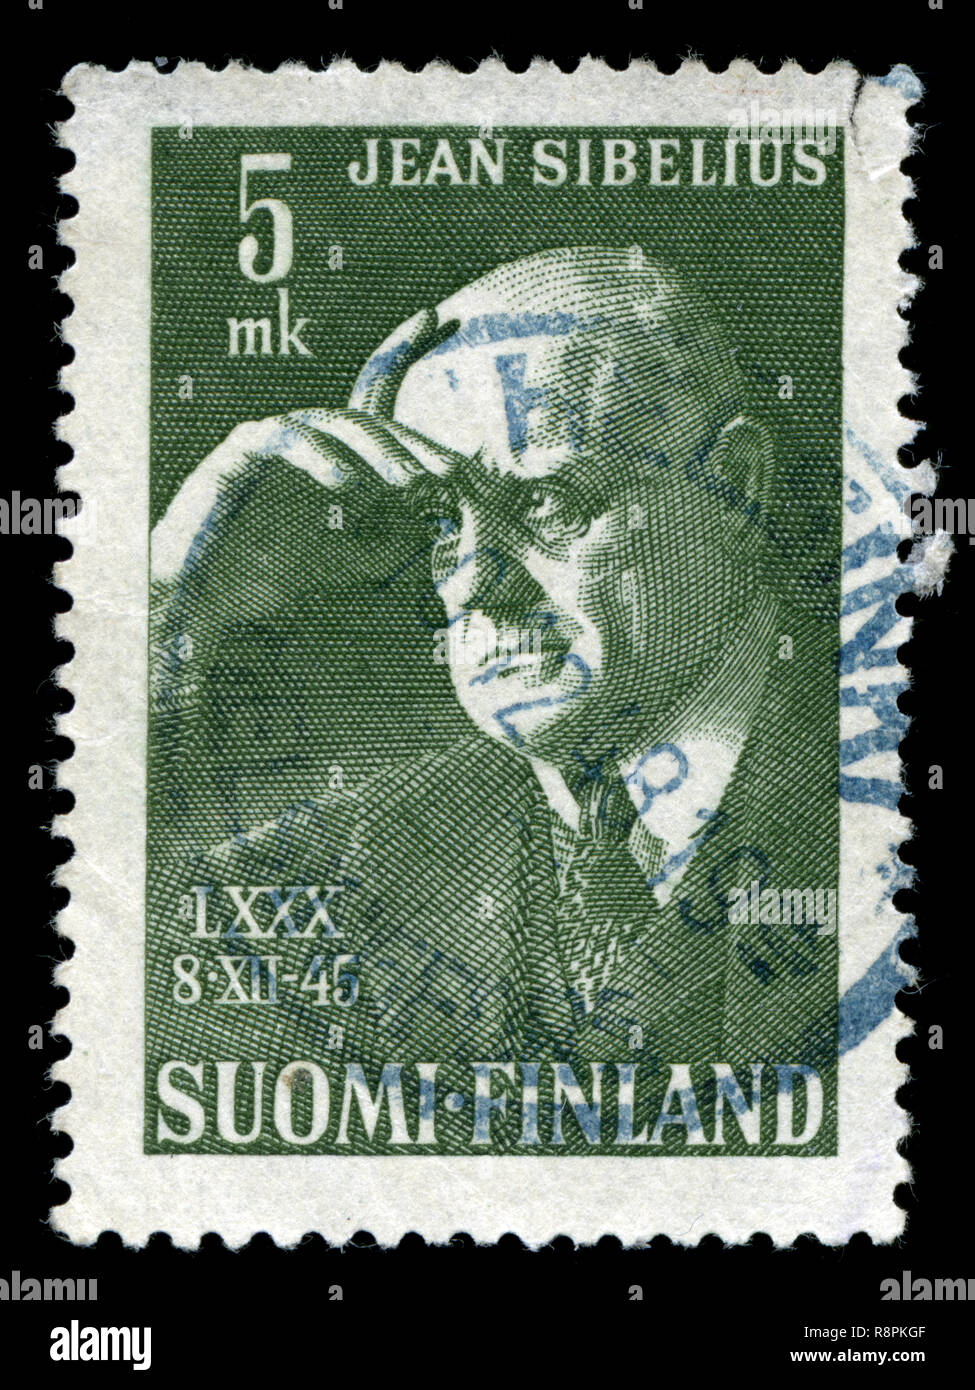 Postage stamp from Finland in the 80th Birth Day of Jean Sibelius series issued in 1945 Stock Photo